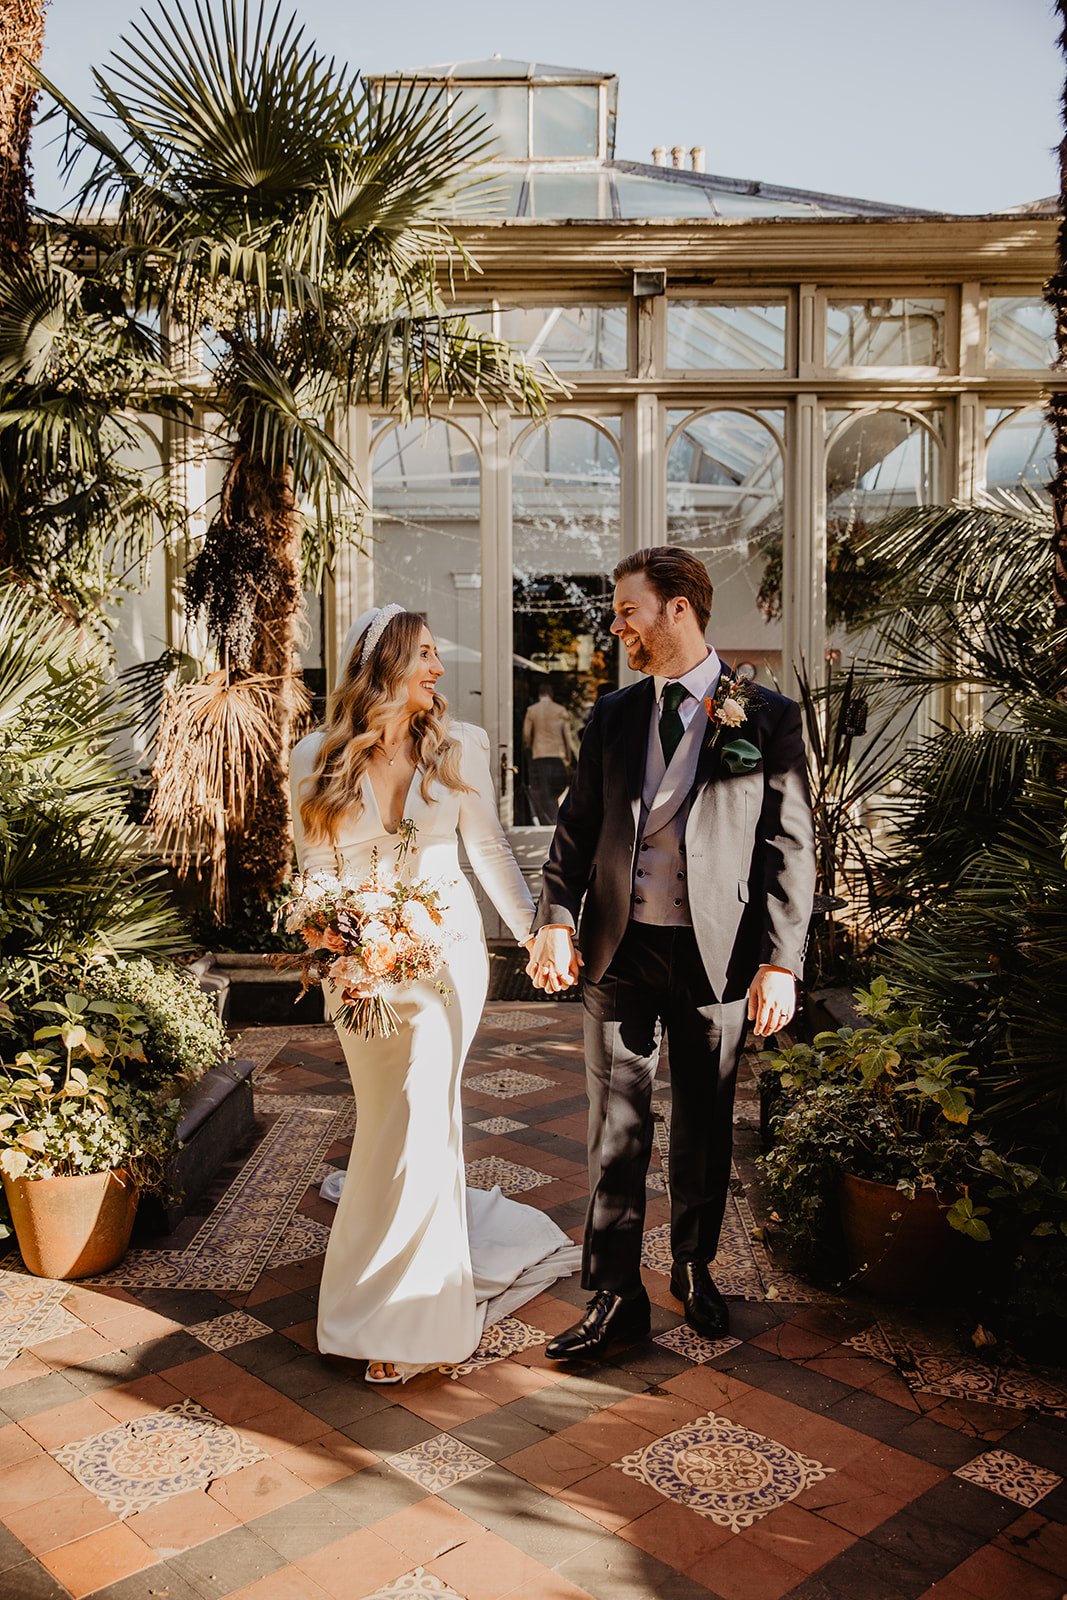 Bride and Groom in gardens at a Hampton Court House Wedding. By Olive Joy Photography